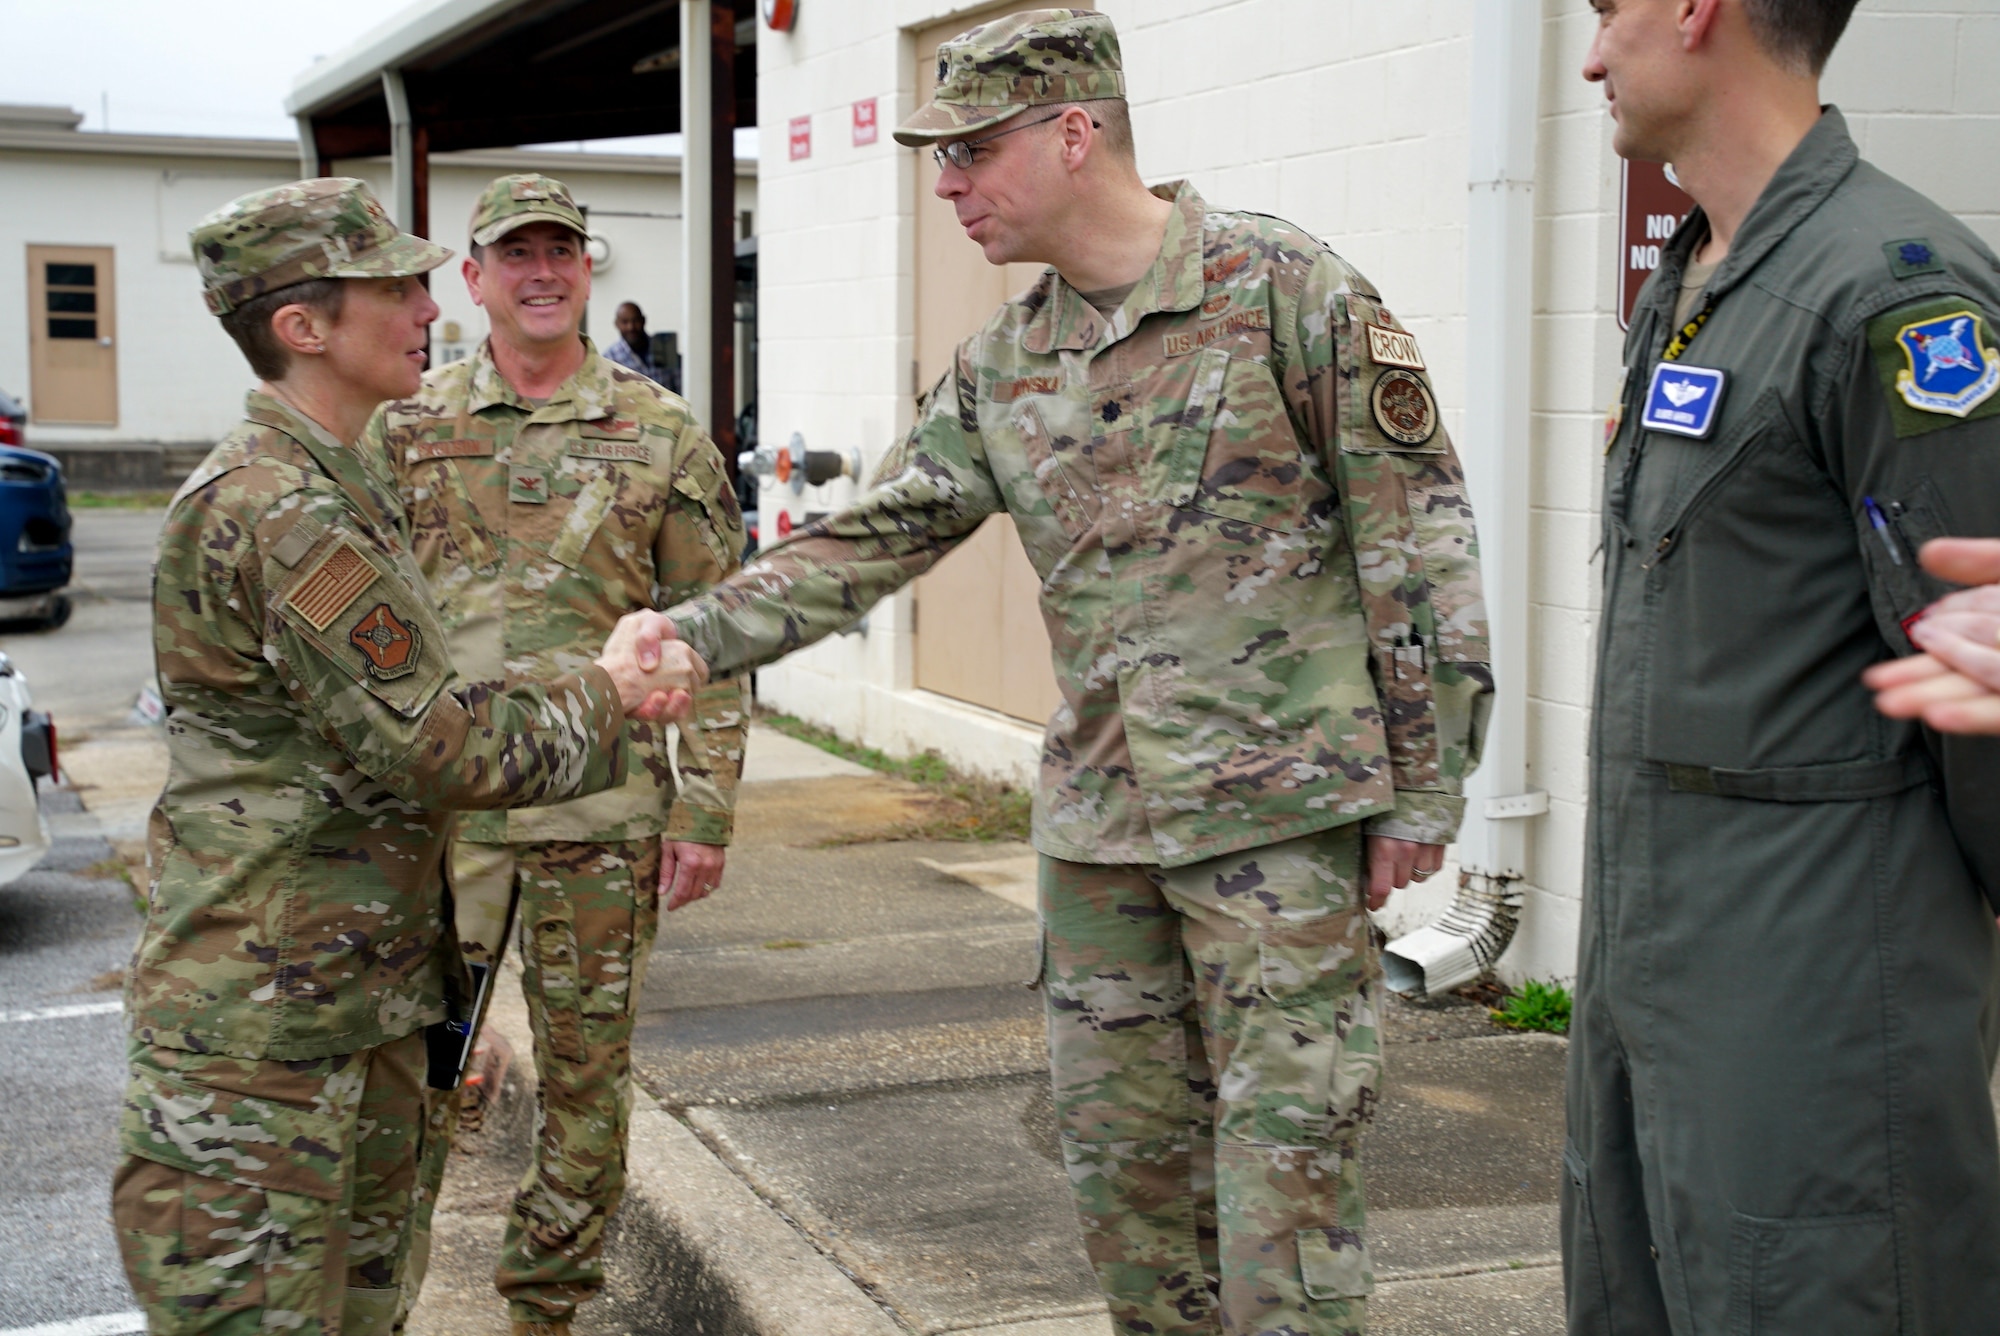 U.S. Air Force Lt. Gen. Leah G. Lauderback, deputy chief of staff for intelligence, surveillance, reconnaissance and cyber effects operations, left, shakes the hand of Lt. Col. Matthew Munska, 850th Spectrum Warfare Group deputy commander, during a visit to the 350th Spectrum Warfare Wing at Eglin Air Force Base, Fla., Feb. 1, 2023. Lauderback visited the 350th SWW to learn more about the wing’s mission to provide cutting-edge Electromagnetic Spectrum capabilities to warfighters. (U.S. Air Force photo by 1st Lt. Benjamin Aronson)